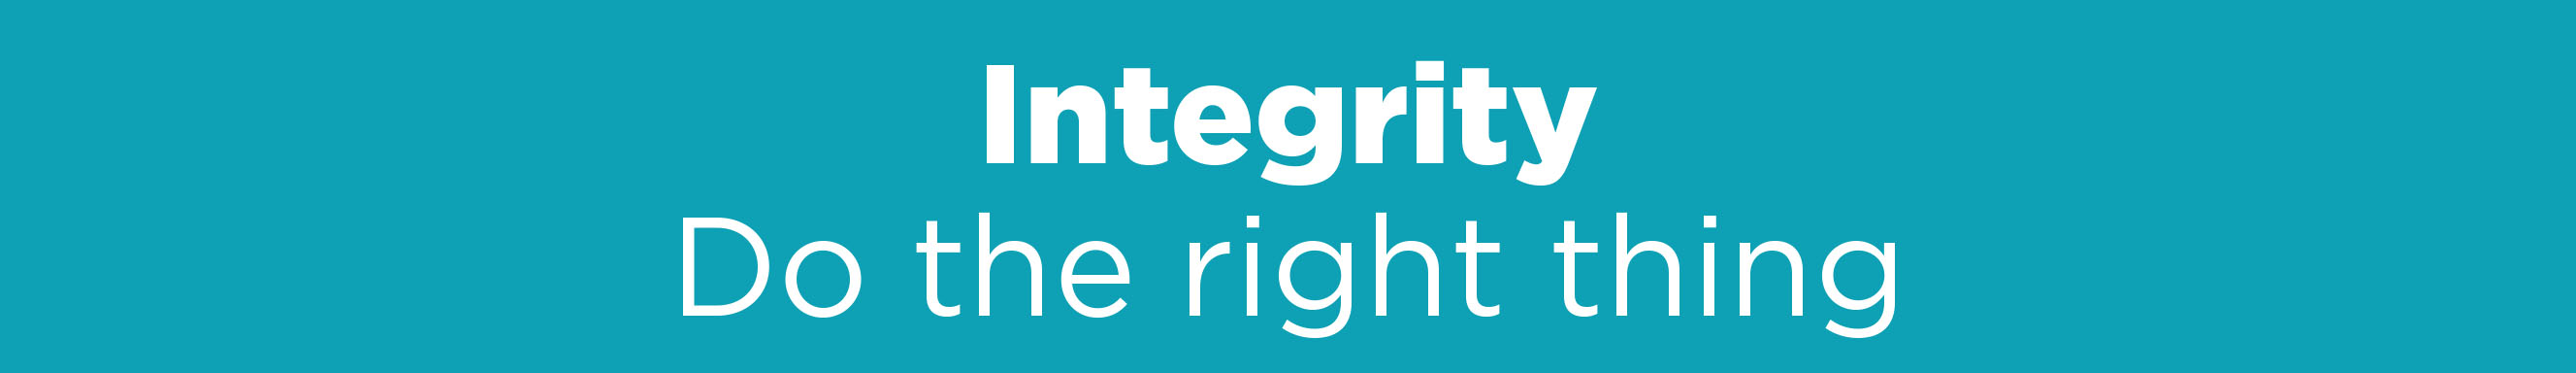 Integrity - Do the right thing